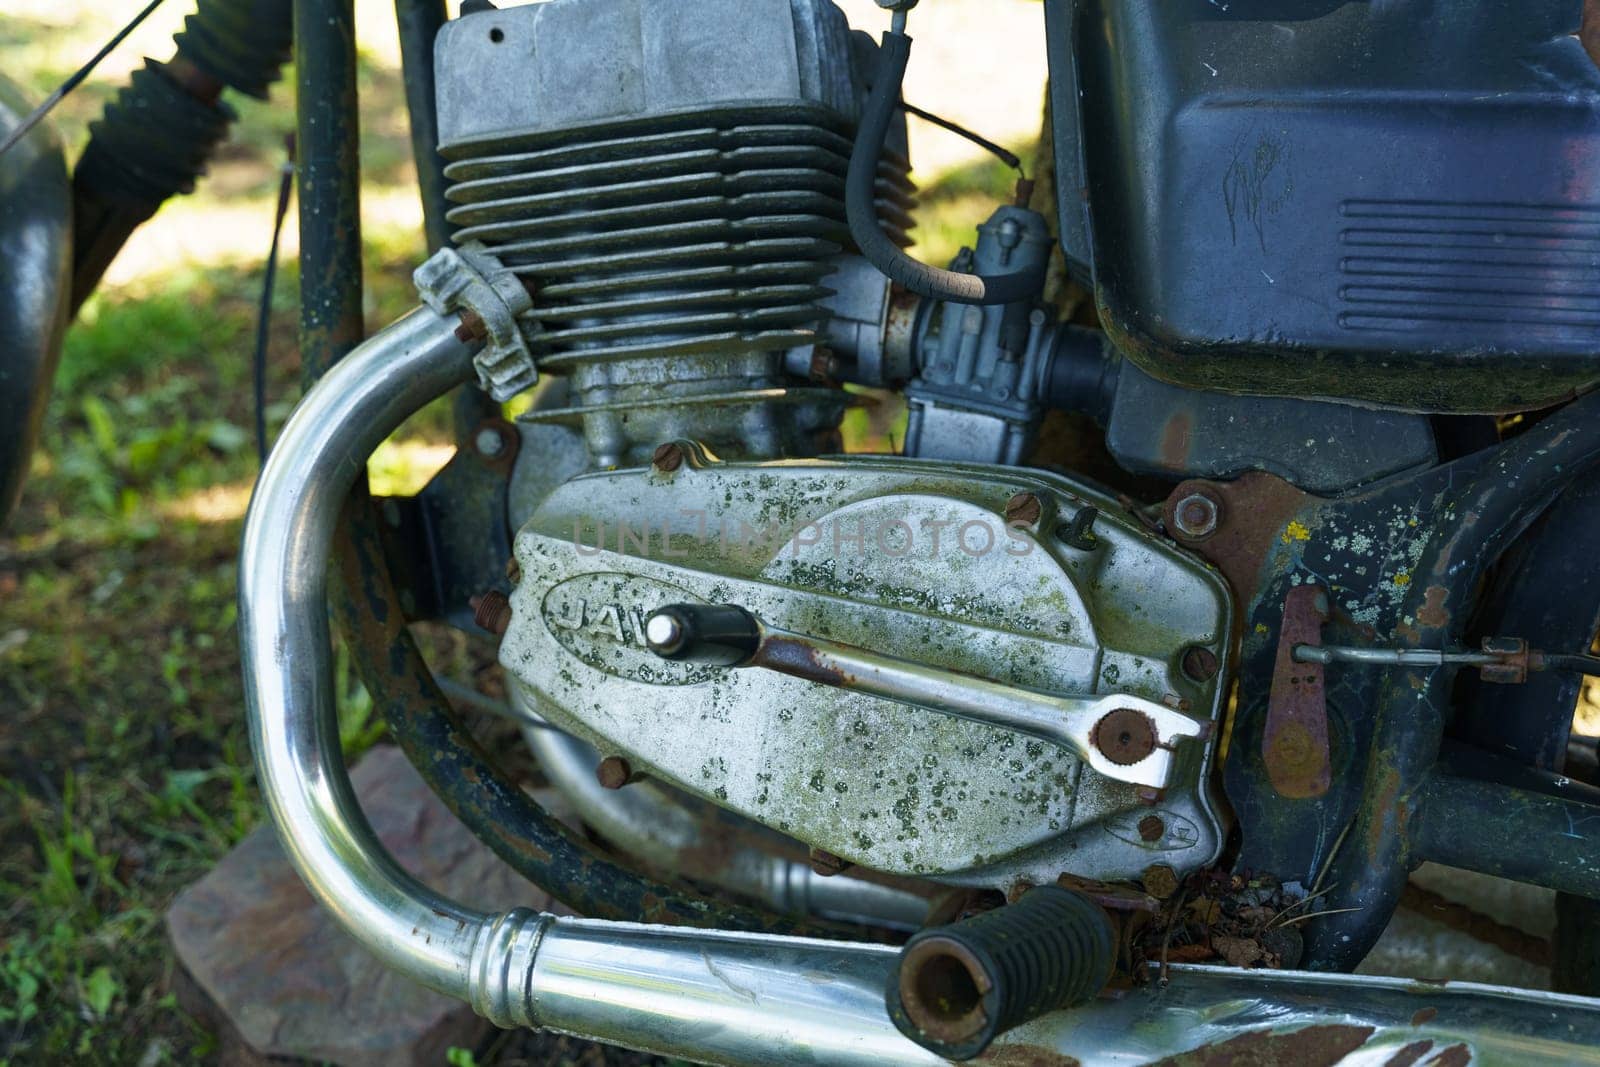 Kretinga, Lithuania - August 12, 2023: Detailed view of the intricate components of an aged motorcycle engine, showing rust, oil residue, and mechanical details.